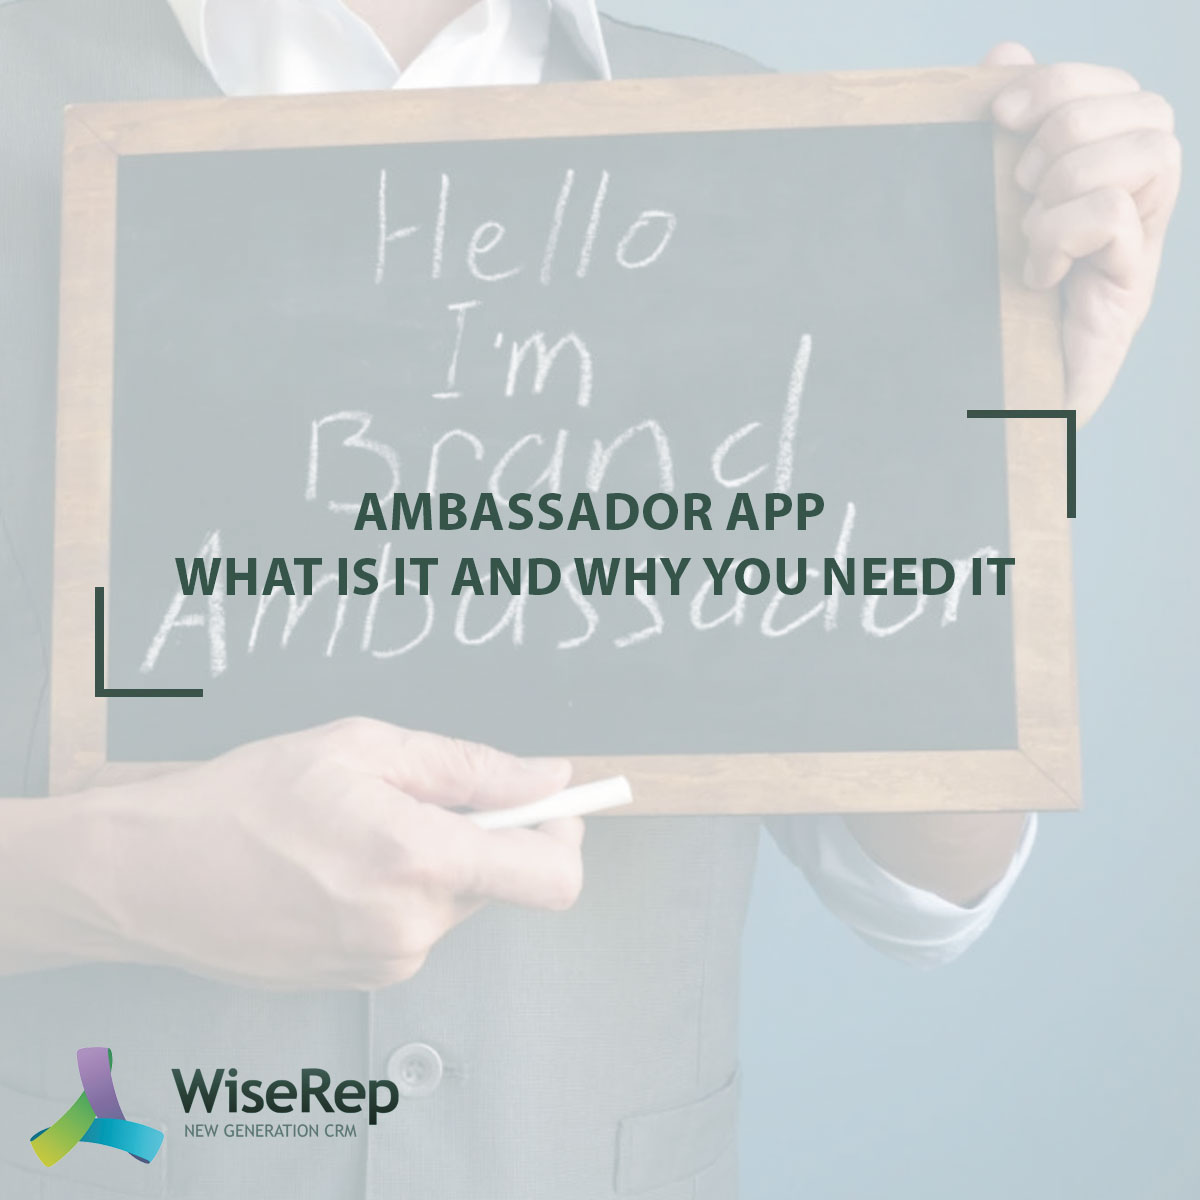 Ambassador app: what is it and why you need it